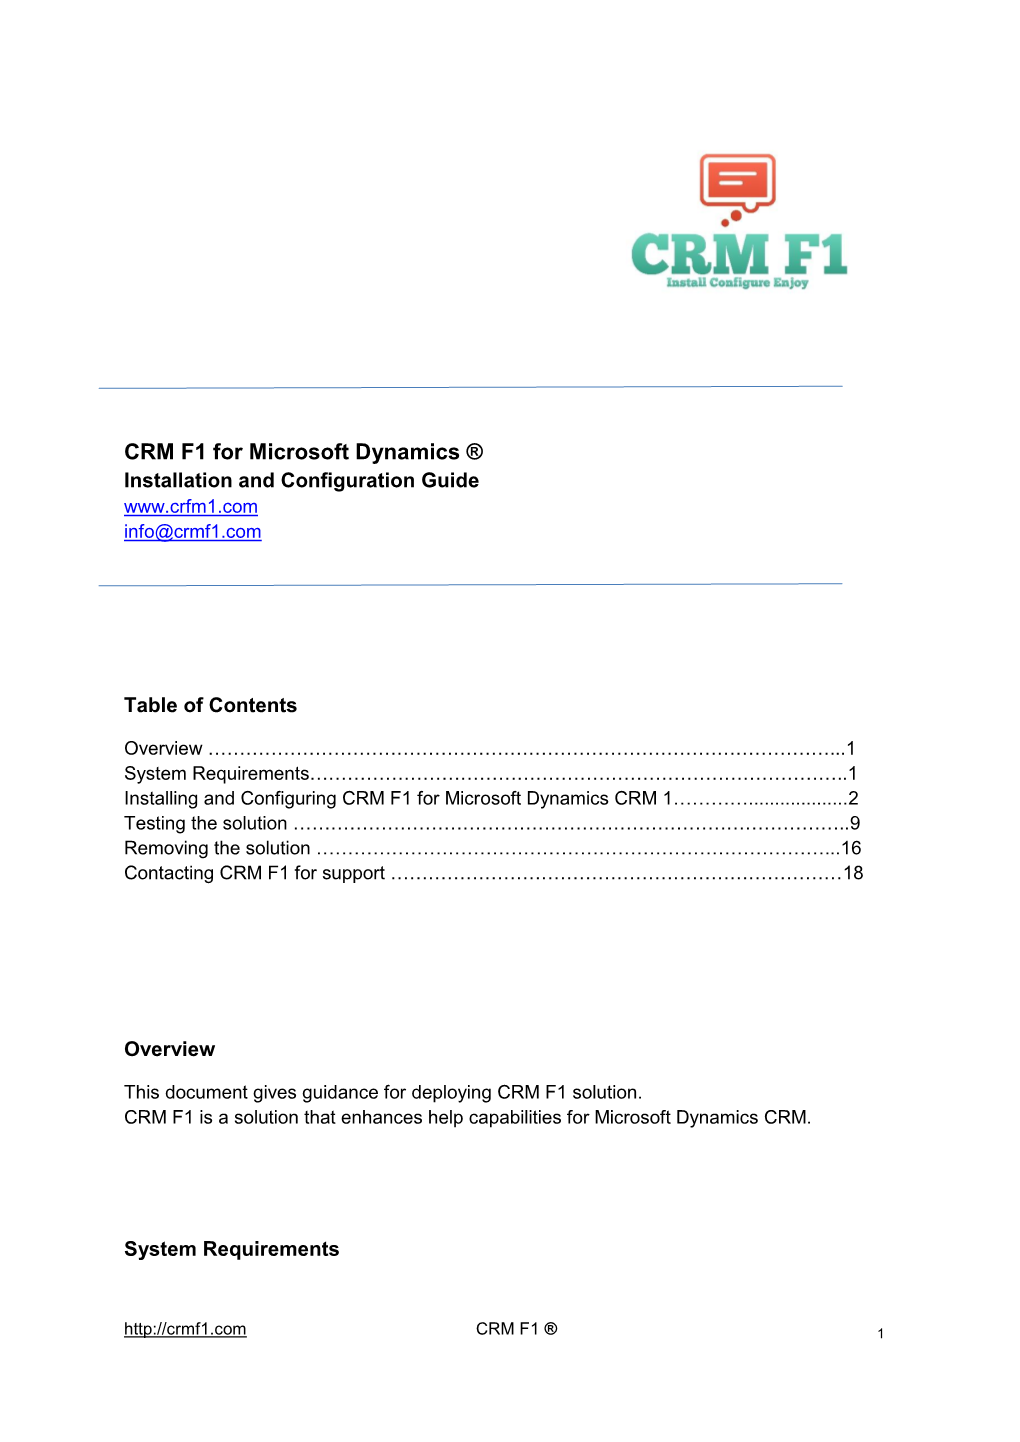 CRM F1 for Microsoft Dynamics ® Installation and Configuration Guide Info@Crmf1.Com